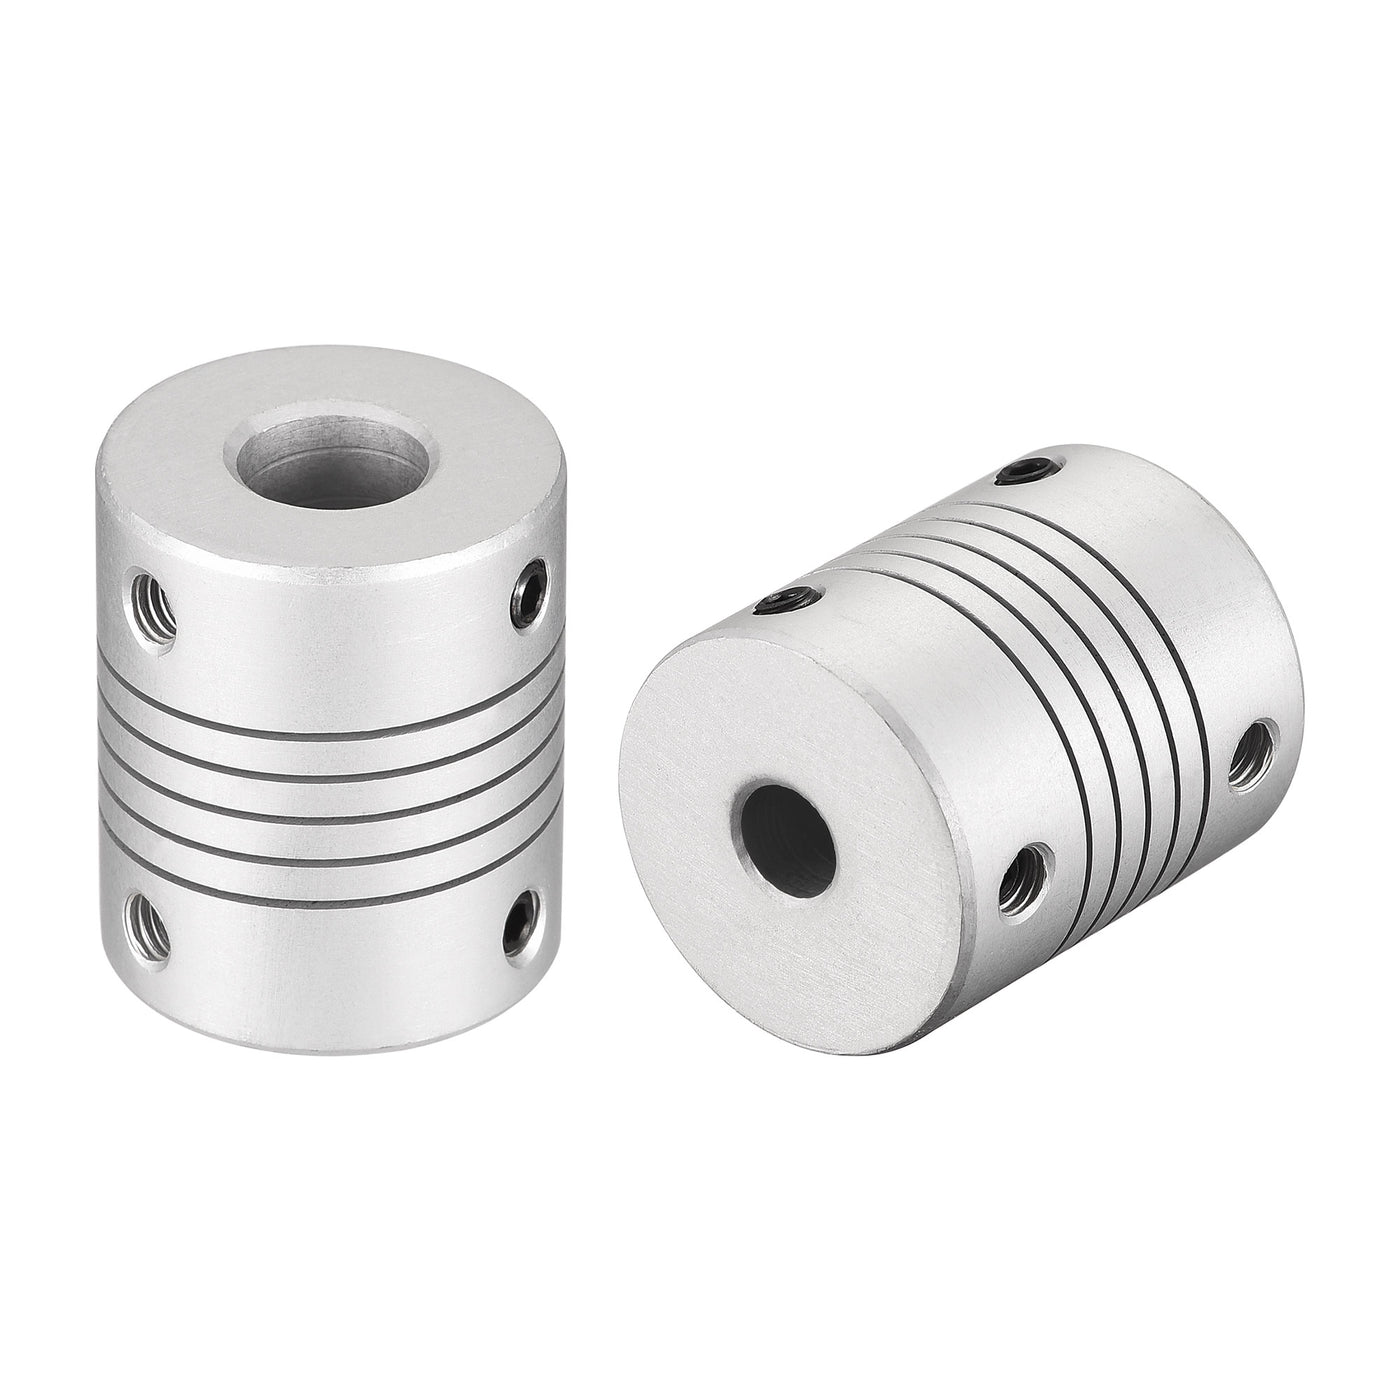 uxcell Uxcell 10mm to 6.35mm Aluminum Alloy Shaft Flexible Coupler L30xD25 Silver 2Pcs